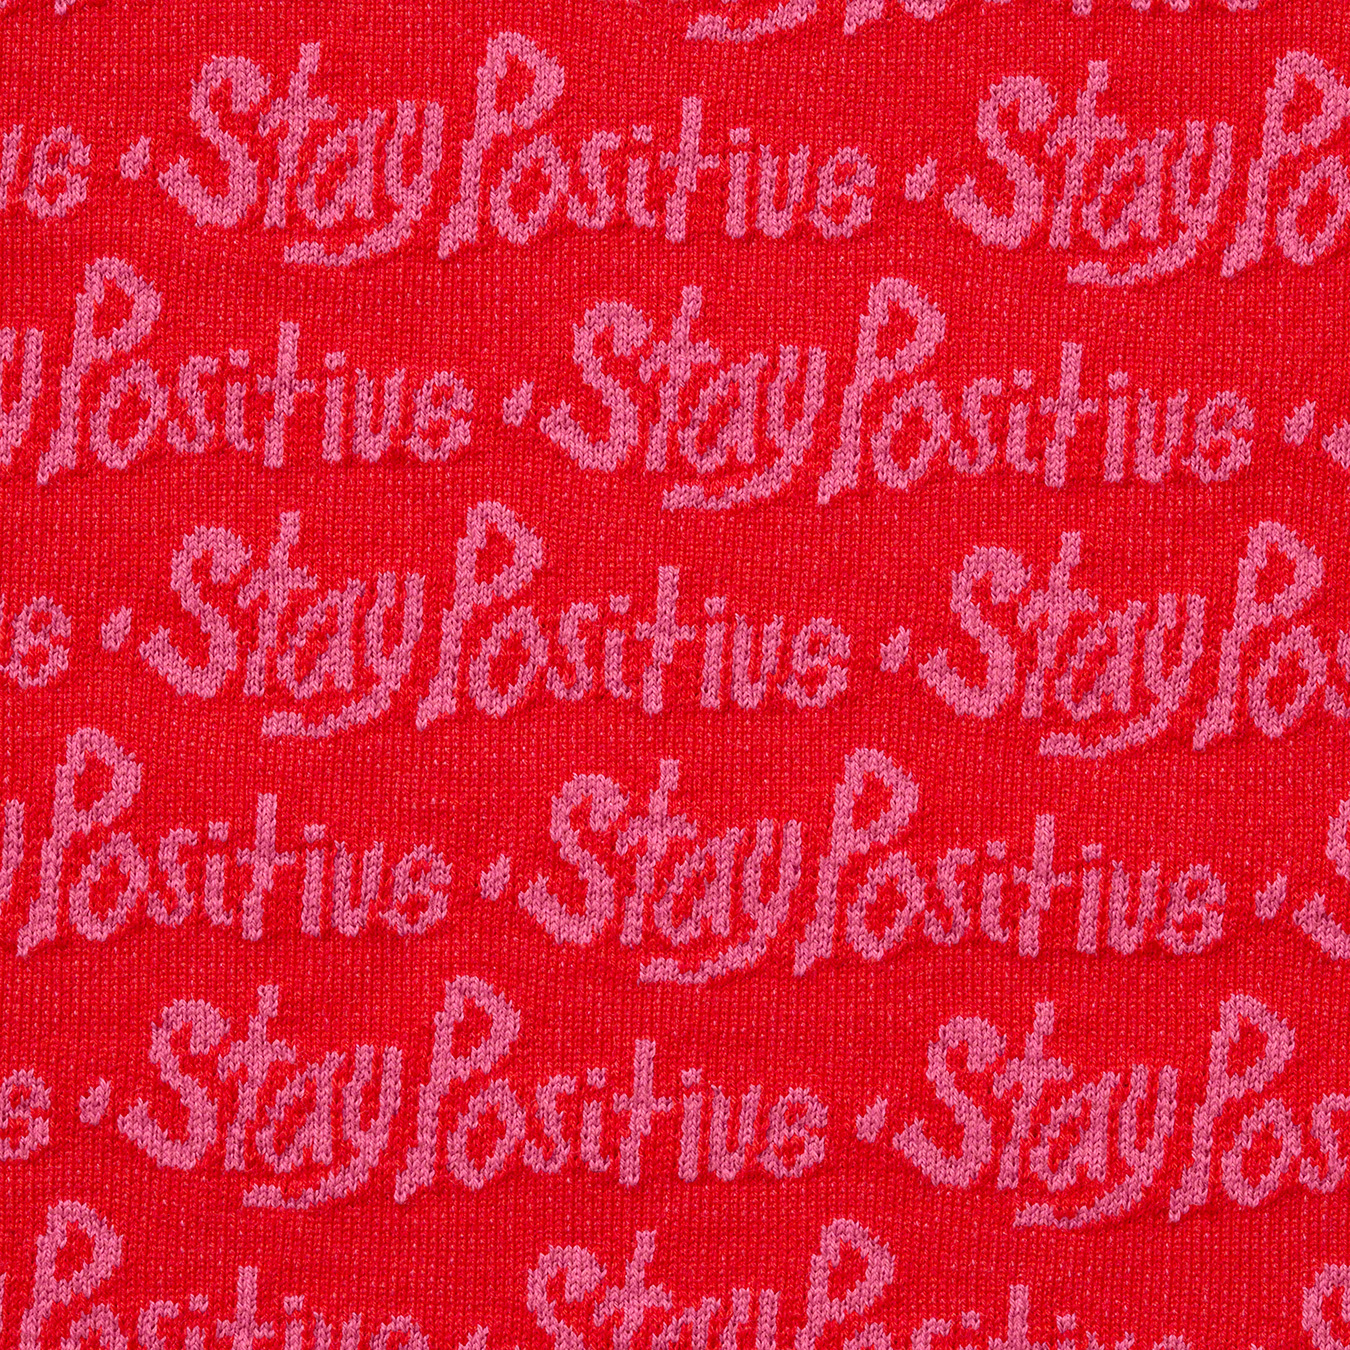 Stay Positive Jacquard S S Top - fall winter 2020 - Supreme